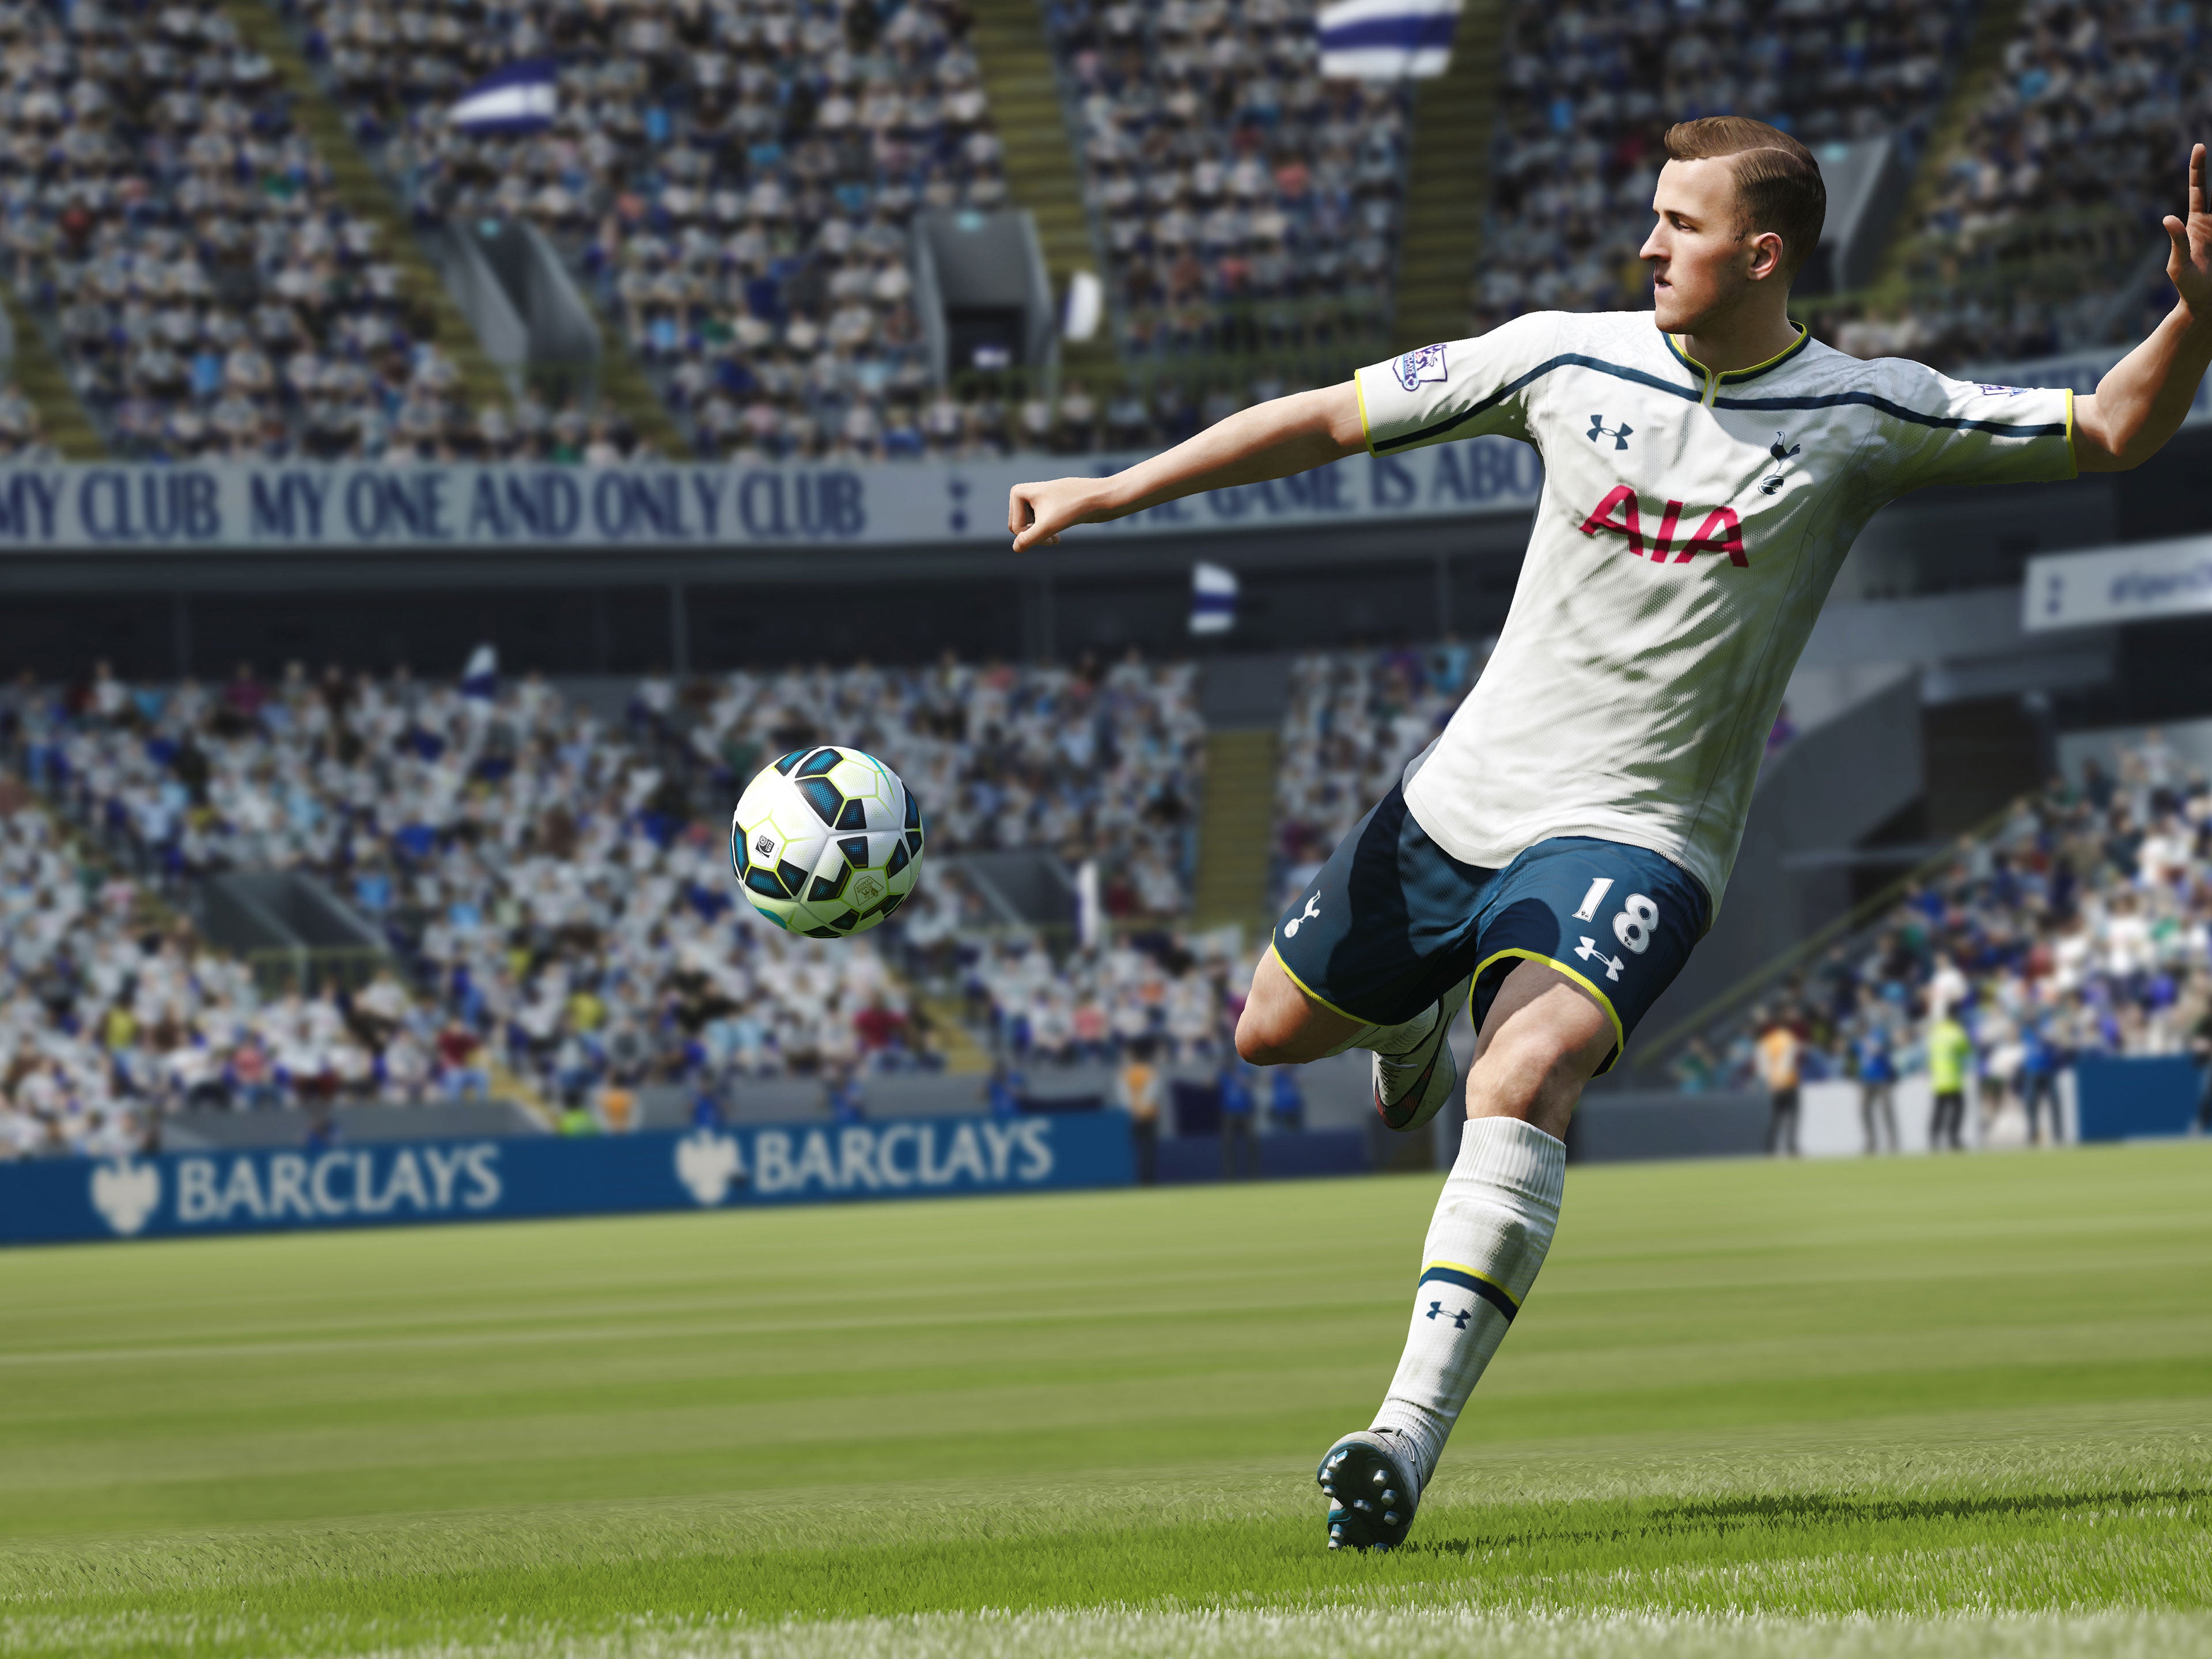 FIFA 16 vs PES 2016: Which is better?